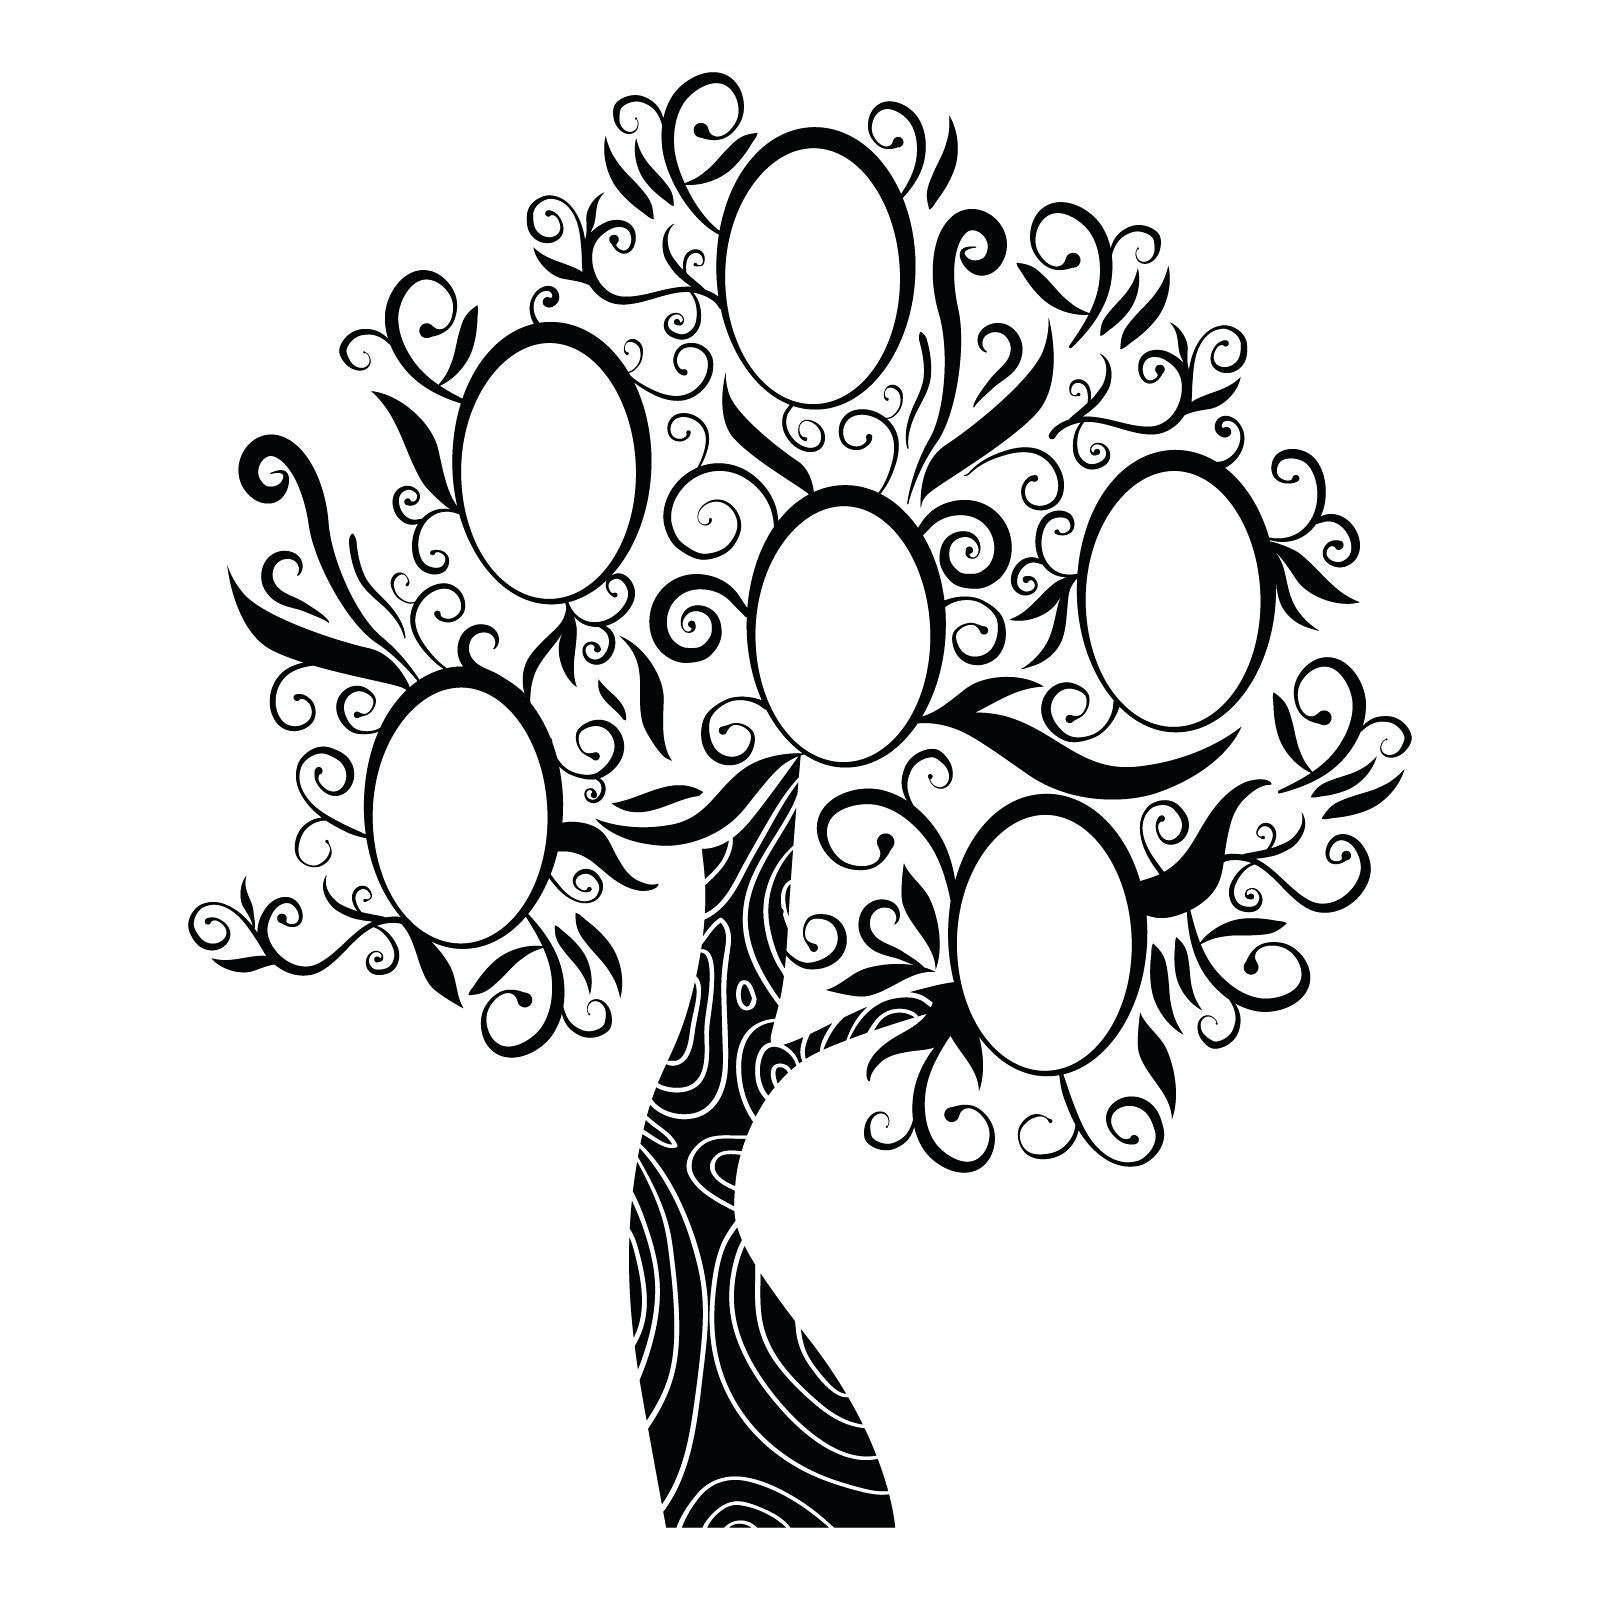 Cute Family Tree Sketch Drawing with simple drawing